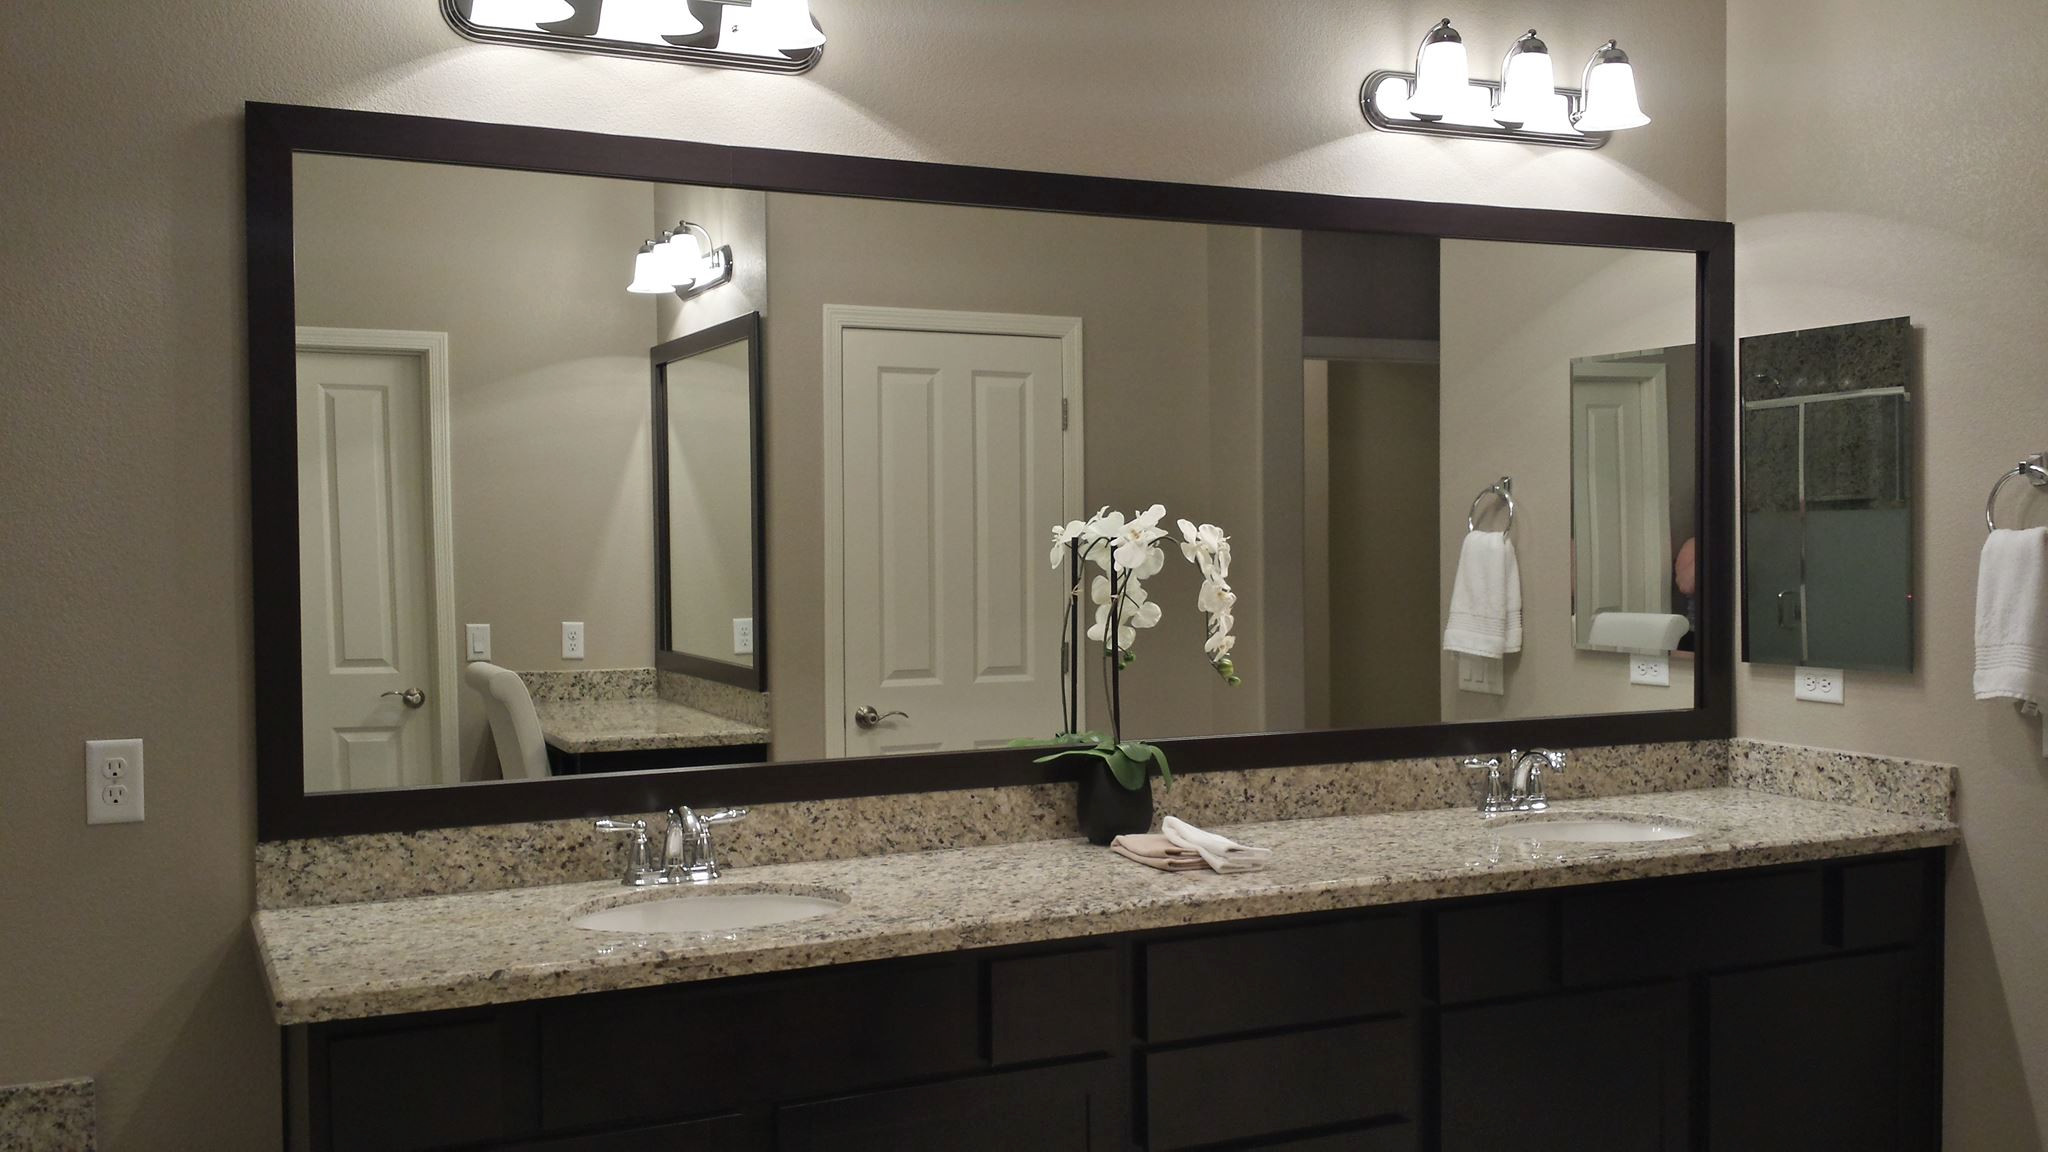 Las Vegas Master Bathroom Mirror And Vanity Mirror Before And After Contemporary Las Vegas By Framemymirror Houzz